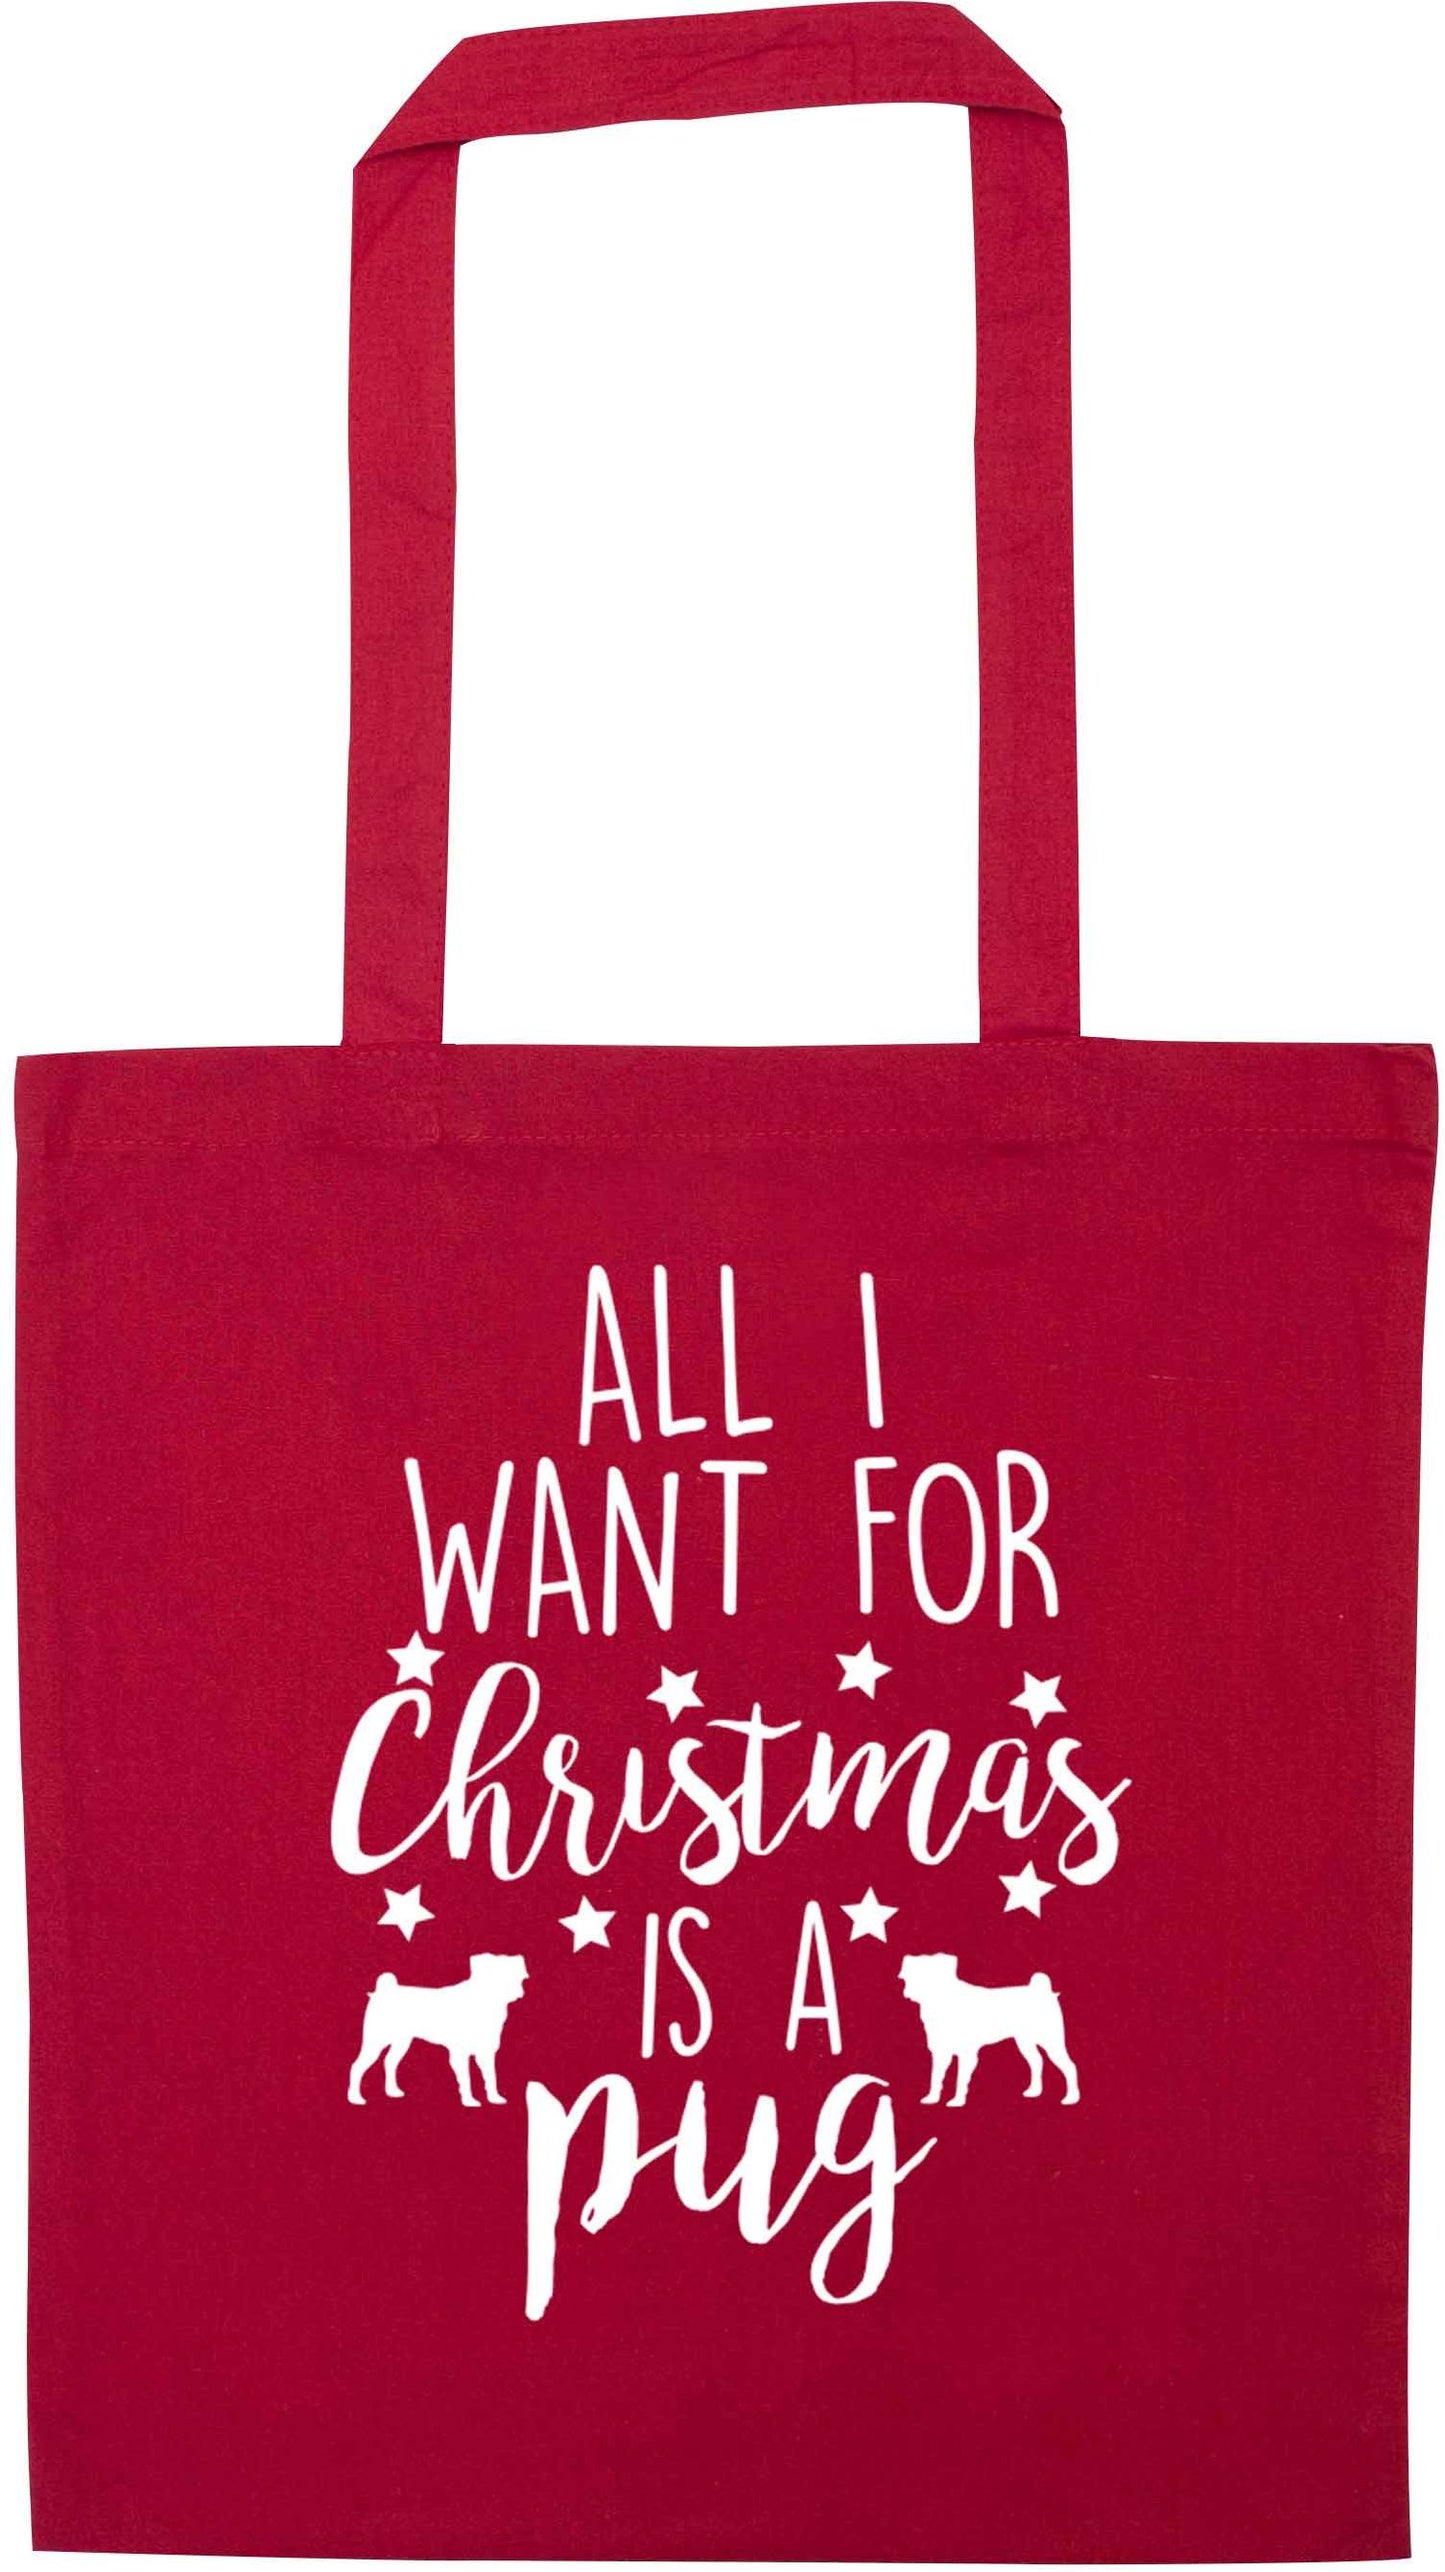 All I want for Christmas is a pug red tote bag